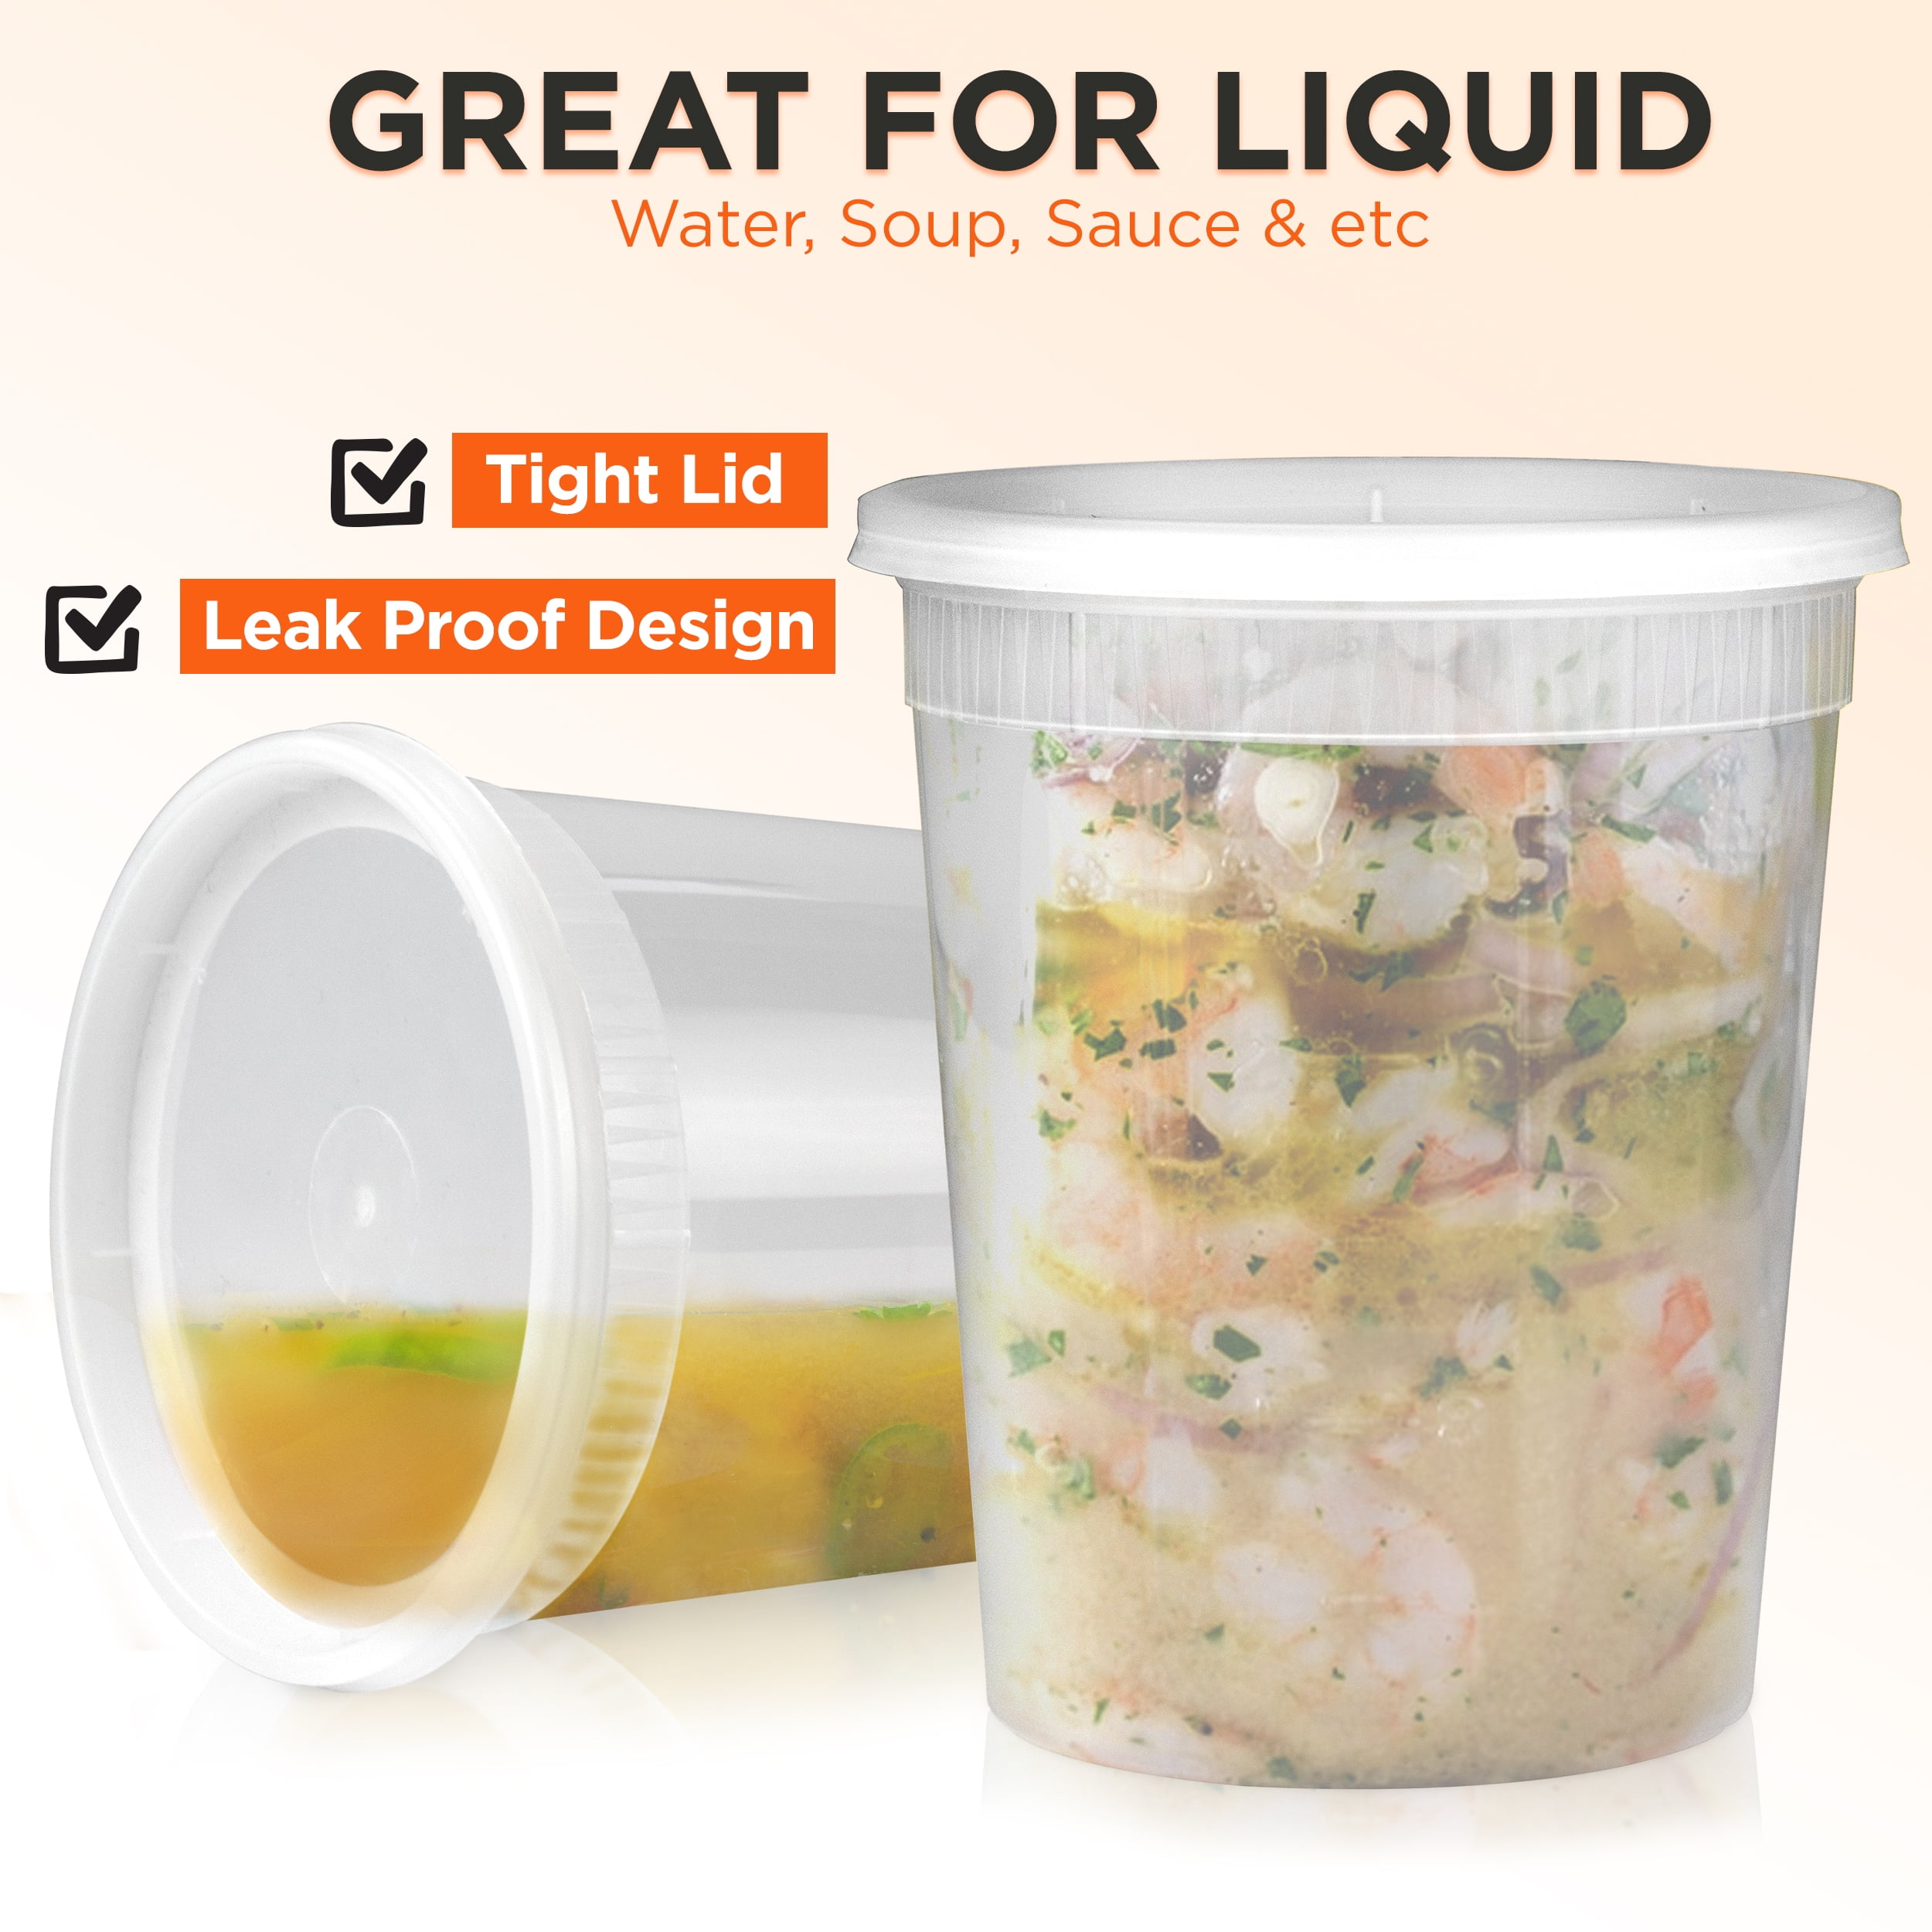 DuraHome - Deli food Storage Containers with Lids 32 oz, Quart Pack of 24  Leak-proof Freezer Safe Microwaveable Soup Storage Container - Clear  Plastic